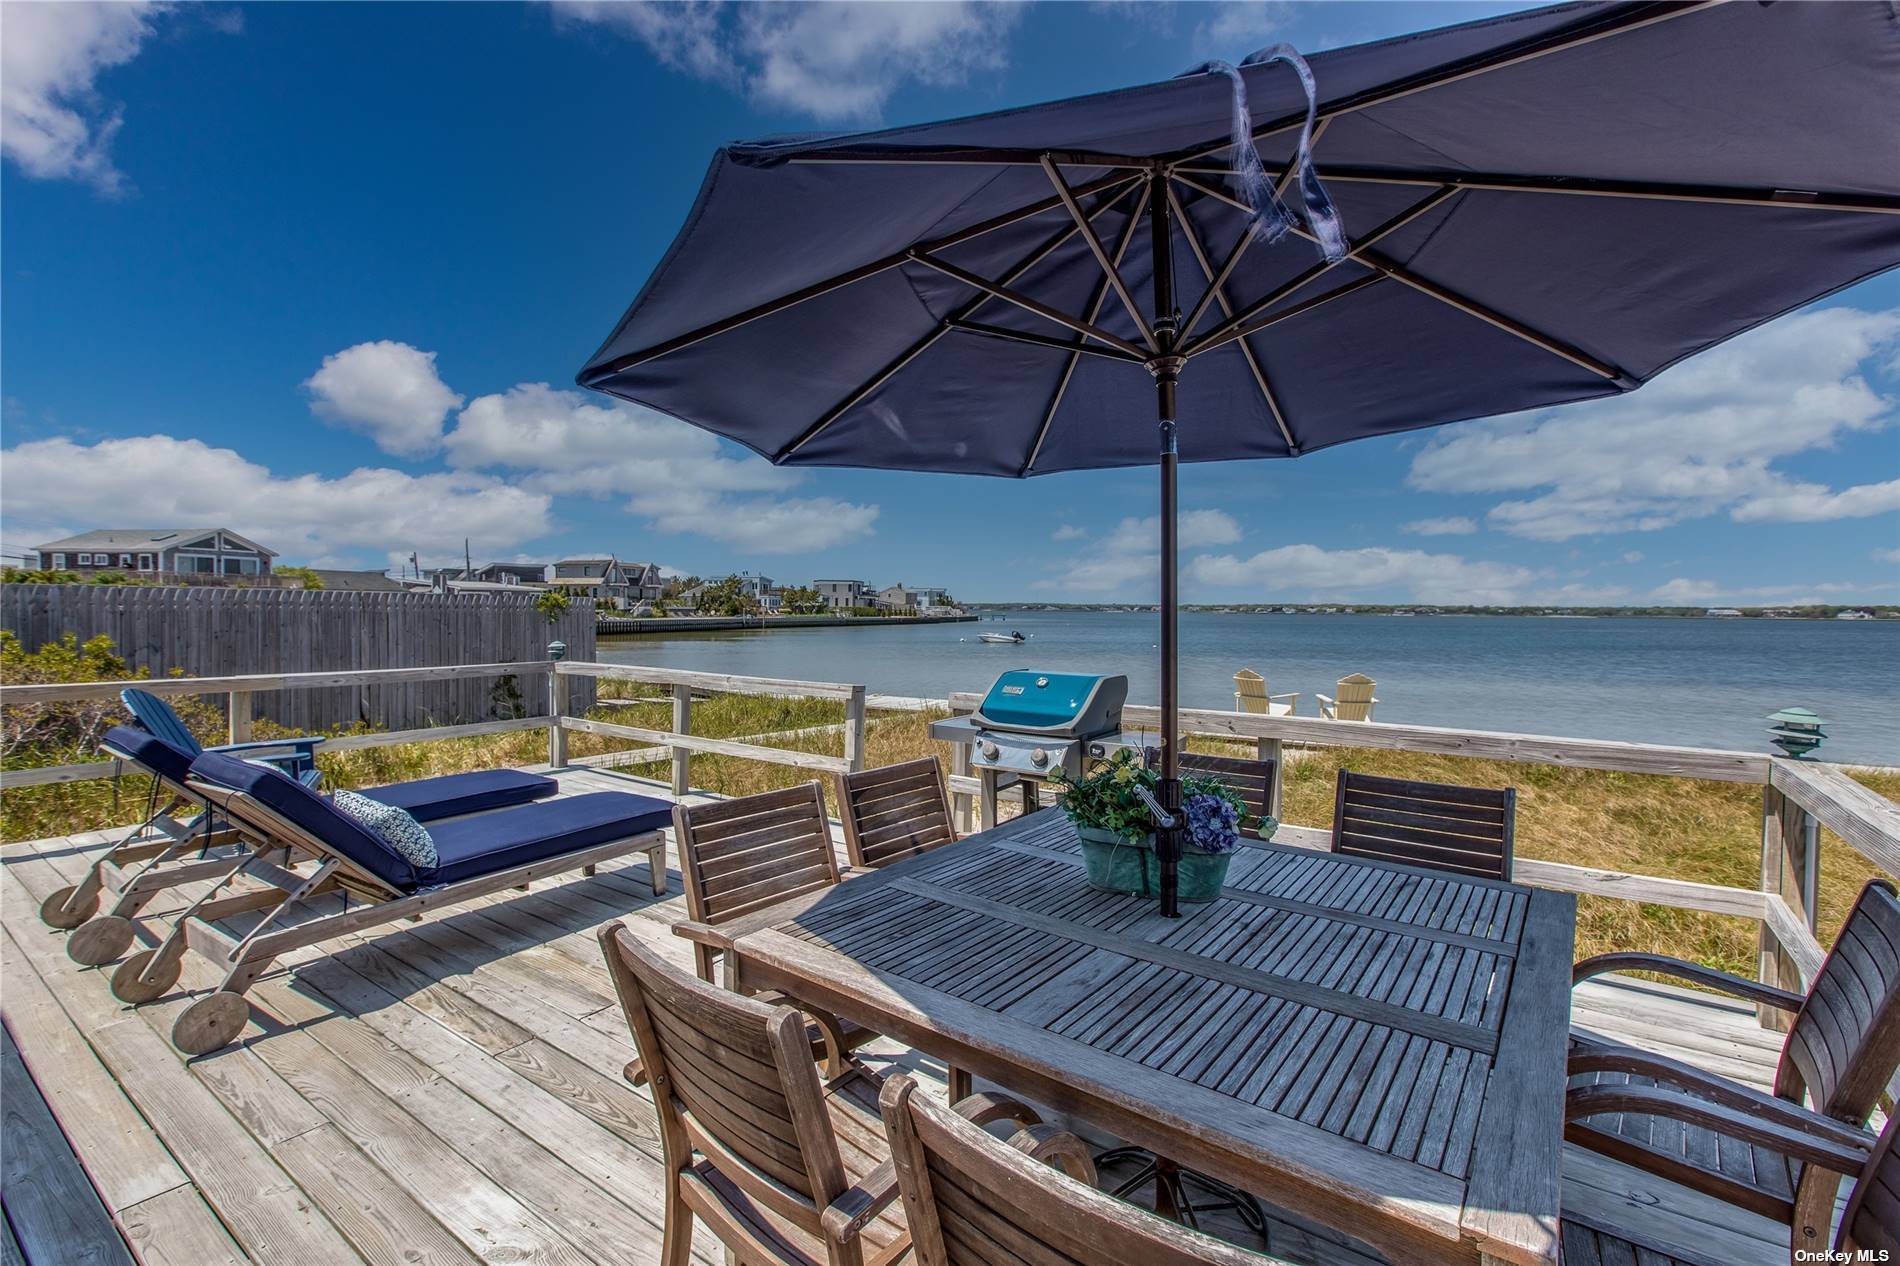 Relax and enjoy your vacation at a quintessential bayfront beachouse directly across the street from one of the most beautiful ocean beaches on LI.